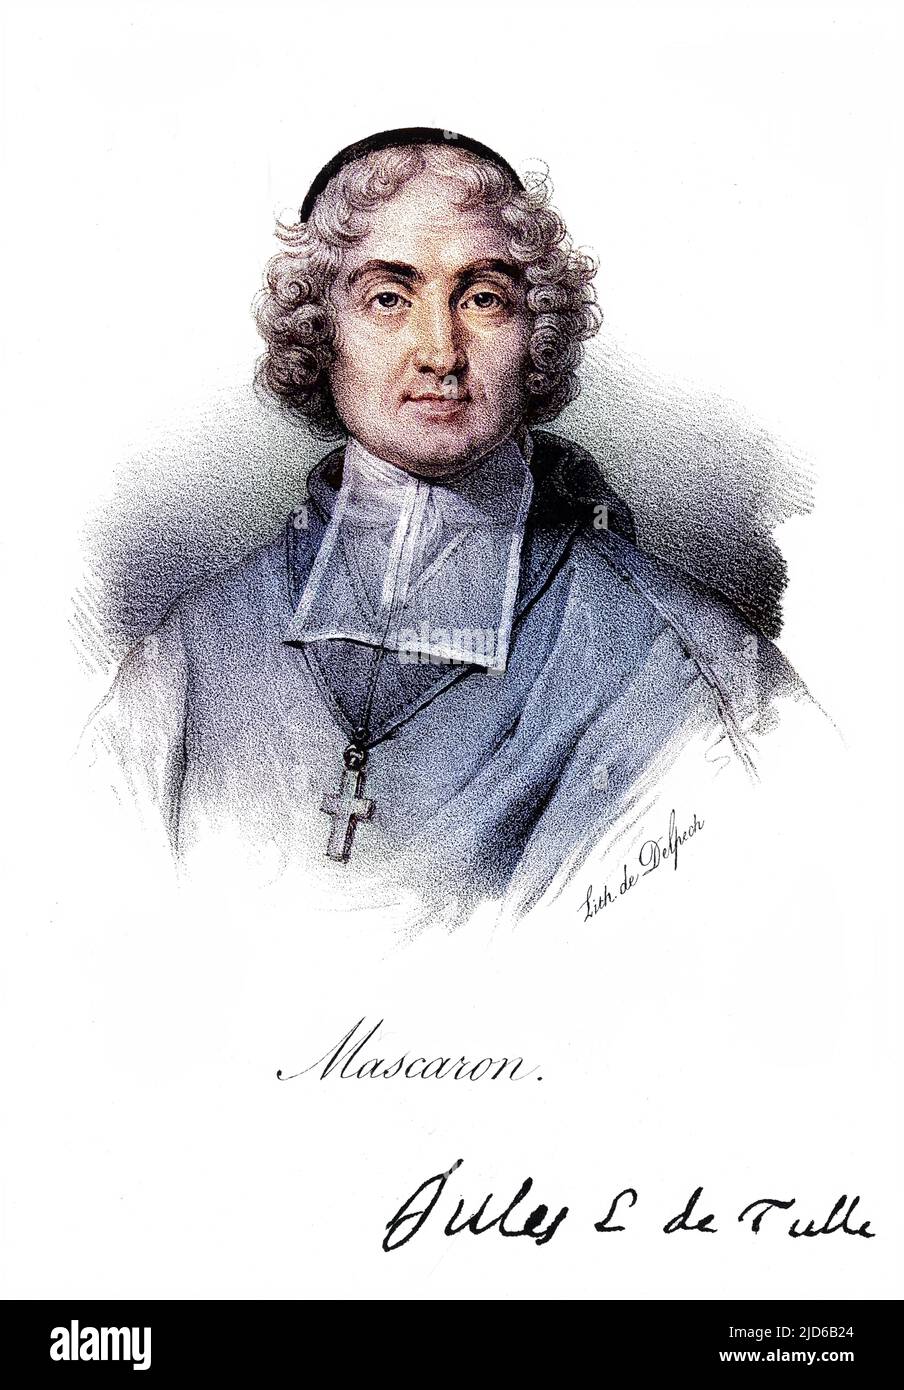 JULES MASCARON French churchman, bishop and comte d'Agen with his autograph Colourised version of : 10164613       Date: 1634 - 1703 Stock Photo